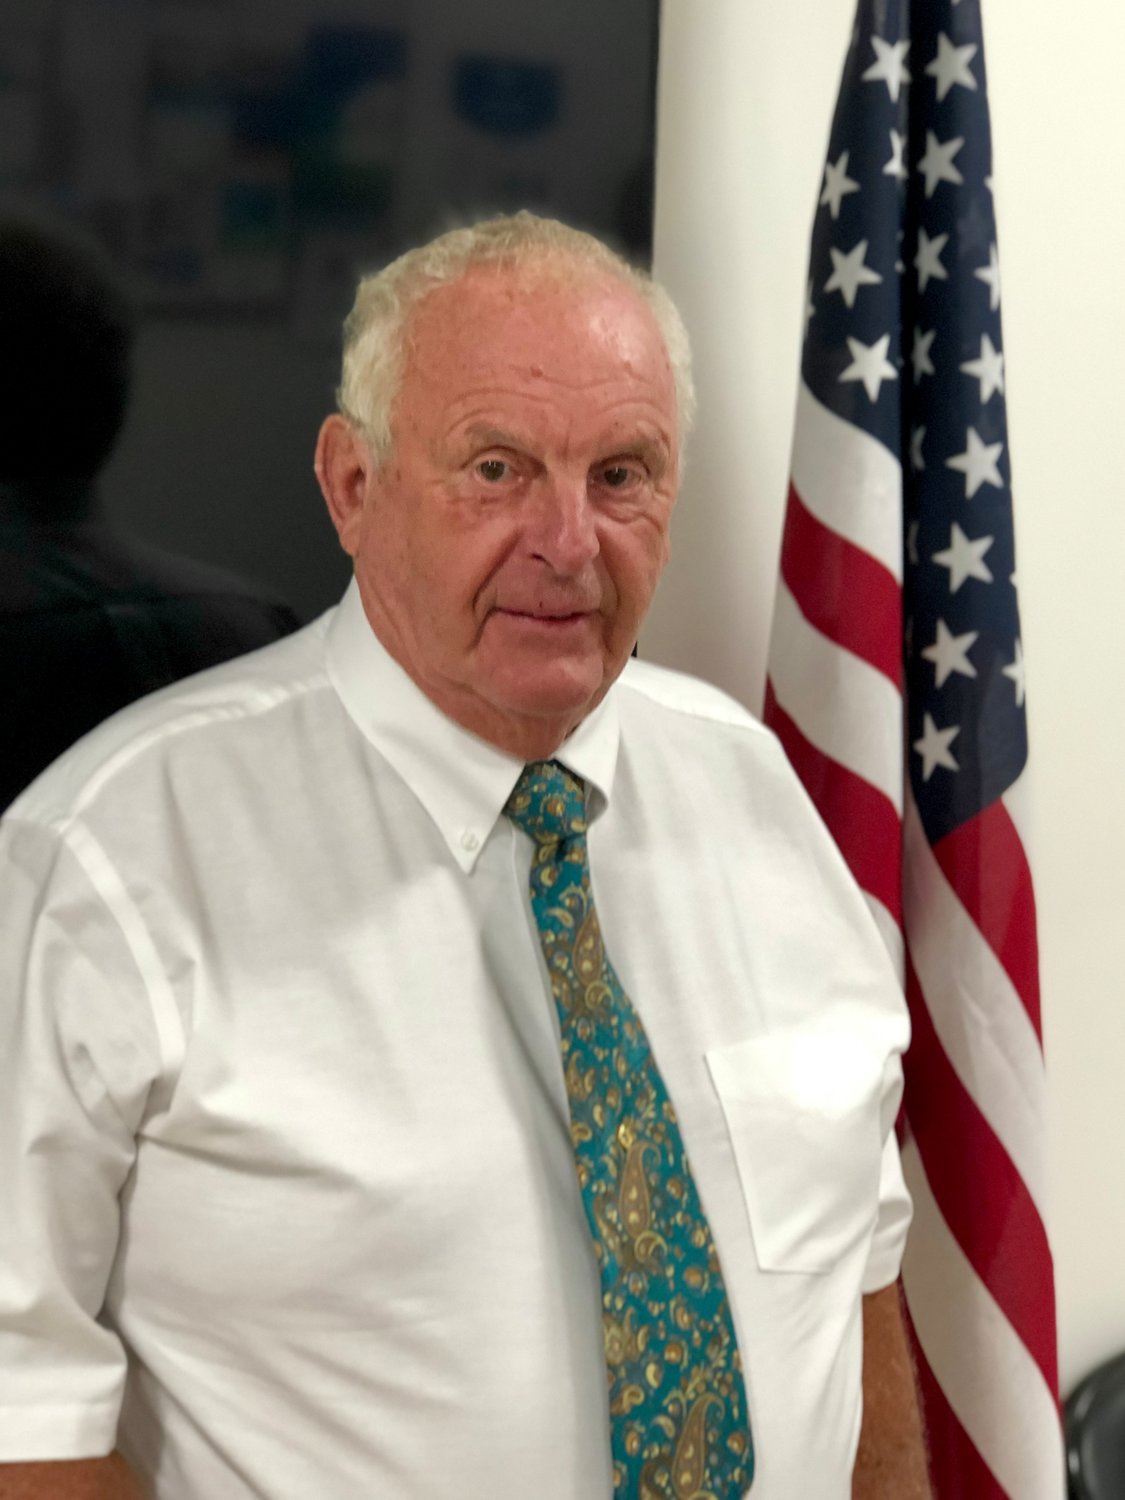 Hubert “Huck” Little, a community leader for more than 40 years, was named the 2019 recipient of The Portsmouth Award Tuesday night by the Town Council.